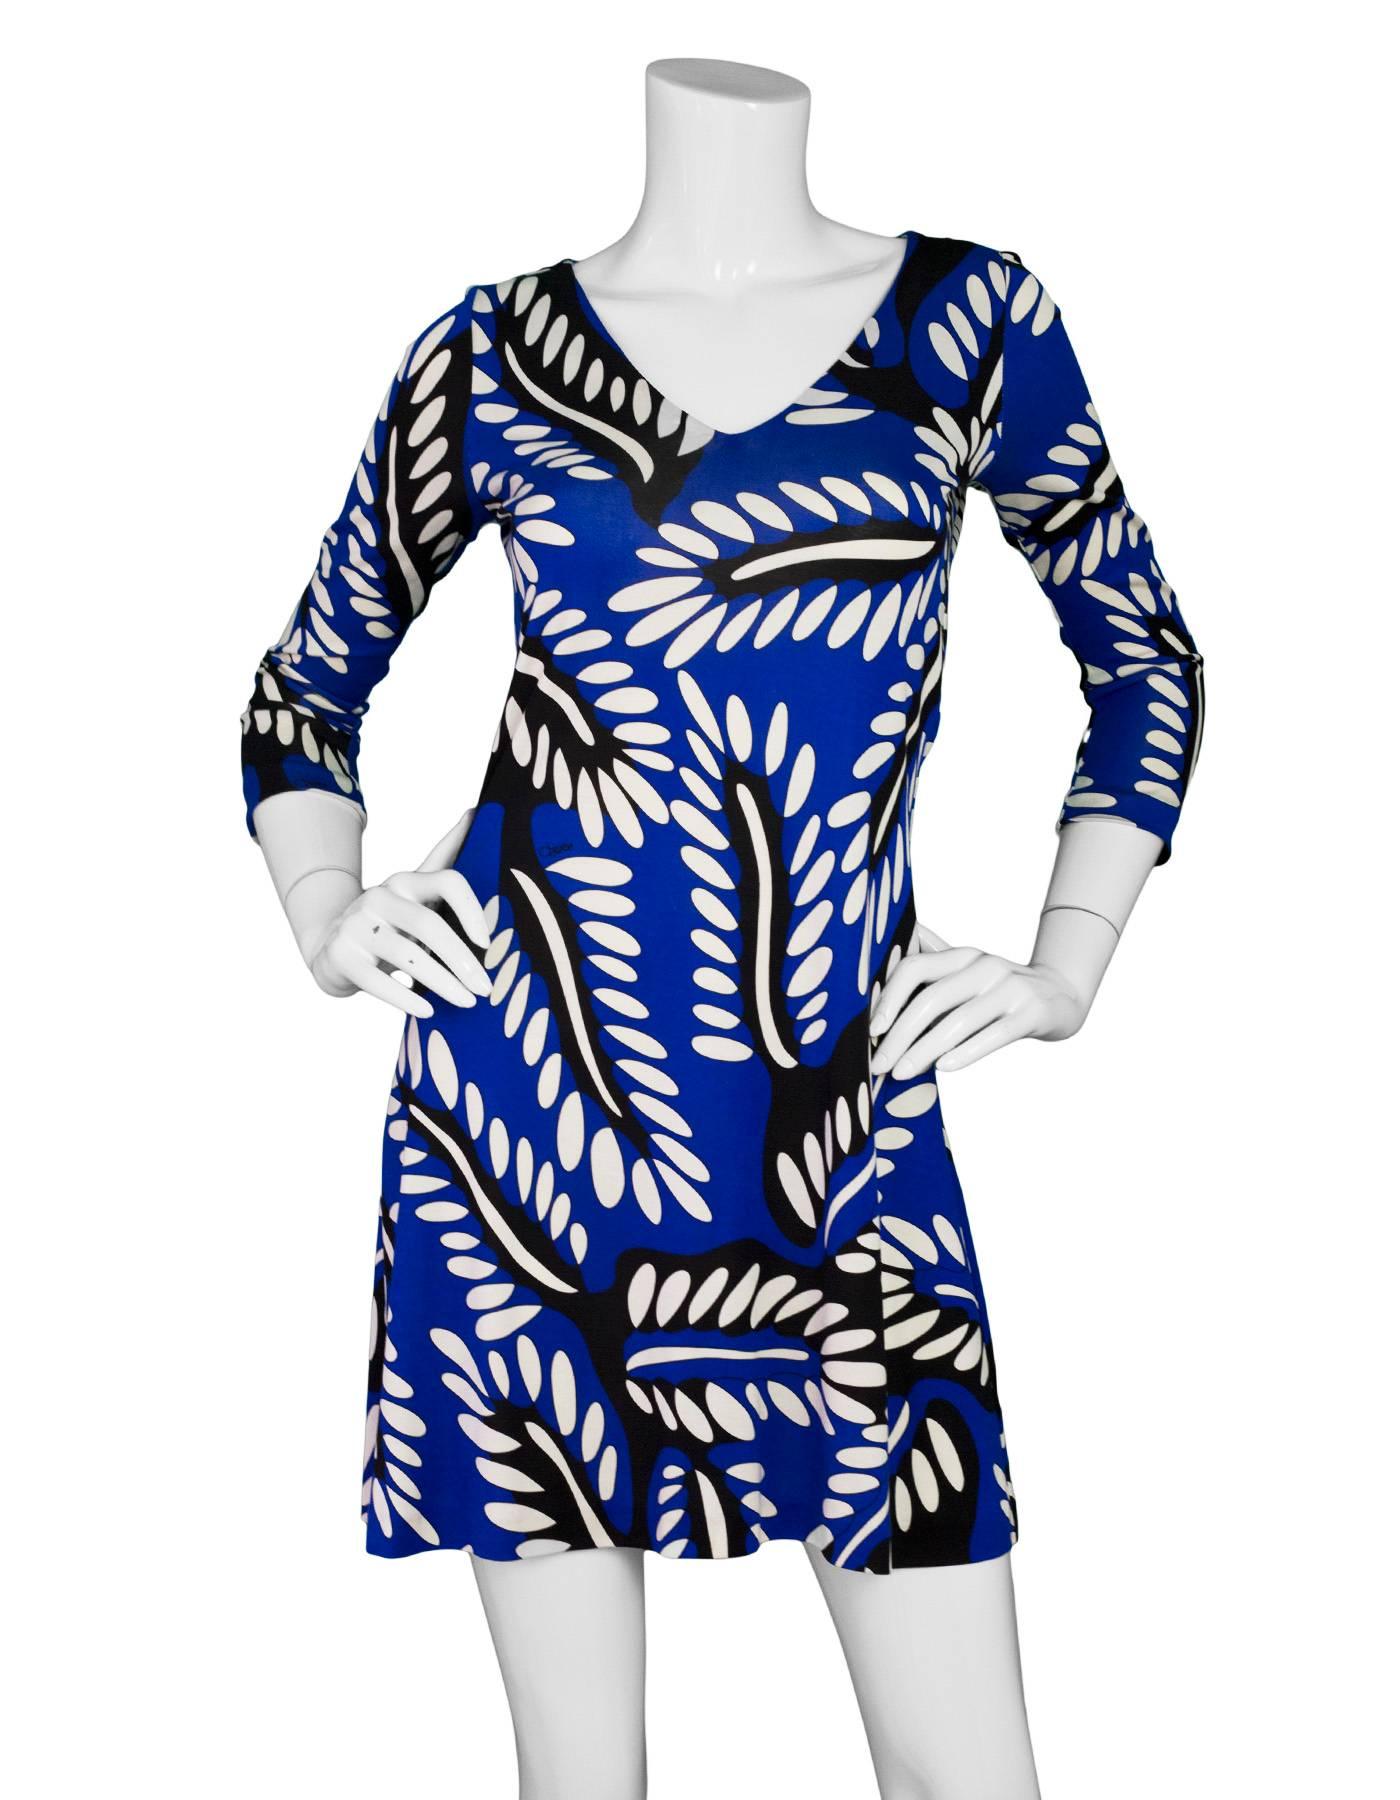 Diane von Furstenberg Blue, Black & White Silk Print Dress Sz 0

Made In: China
Color: Blue, black, white
Composition: 100% Silk
Lining: None
Closure/Opening: Pull over
Exterior Pockets: None
Overall Condition: Excellent pre-owned condition
Marked